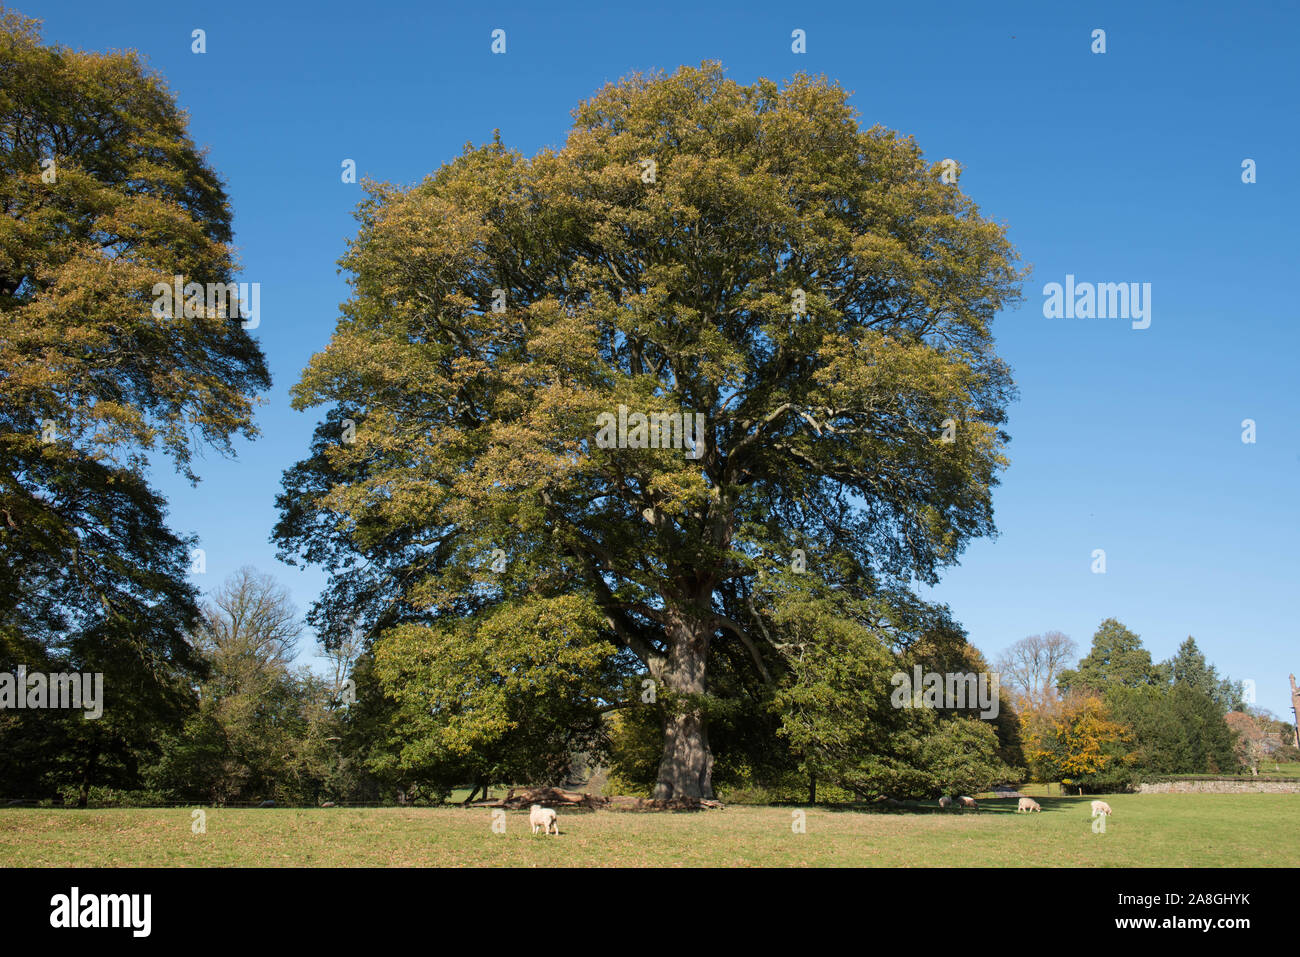 Autumnal Colours of the Turkey Oak or Austrian Oak Tree (Quercus cerris) with a Bright Blue Sky Background and Grazing Sheep in a Park Stock Photo